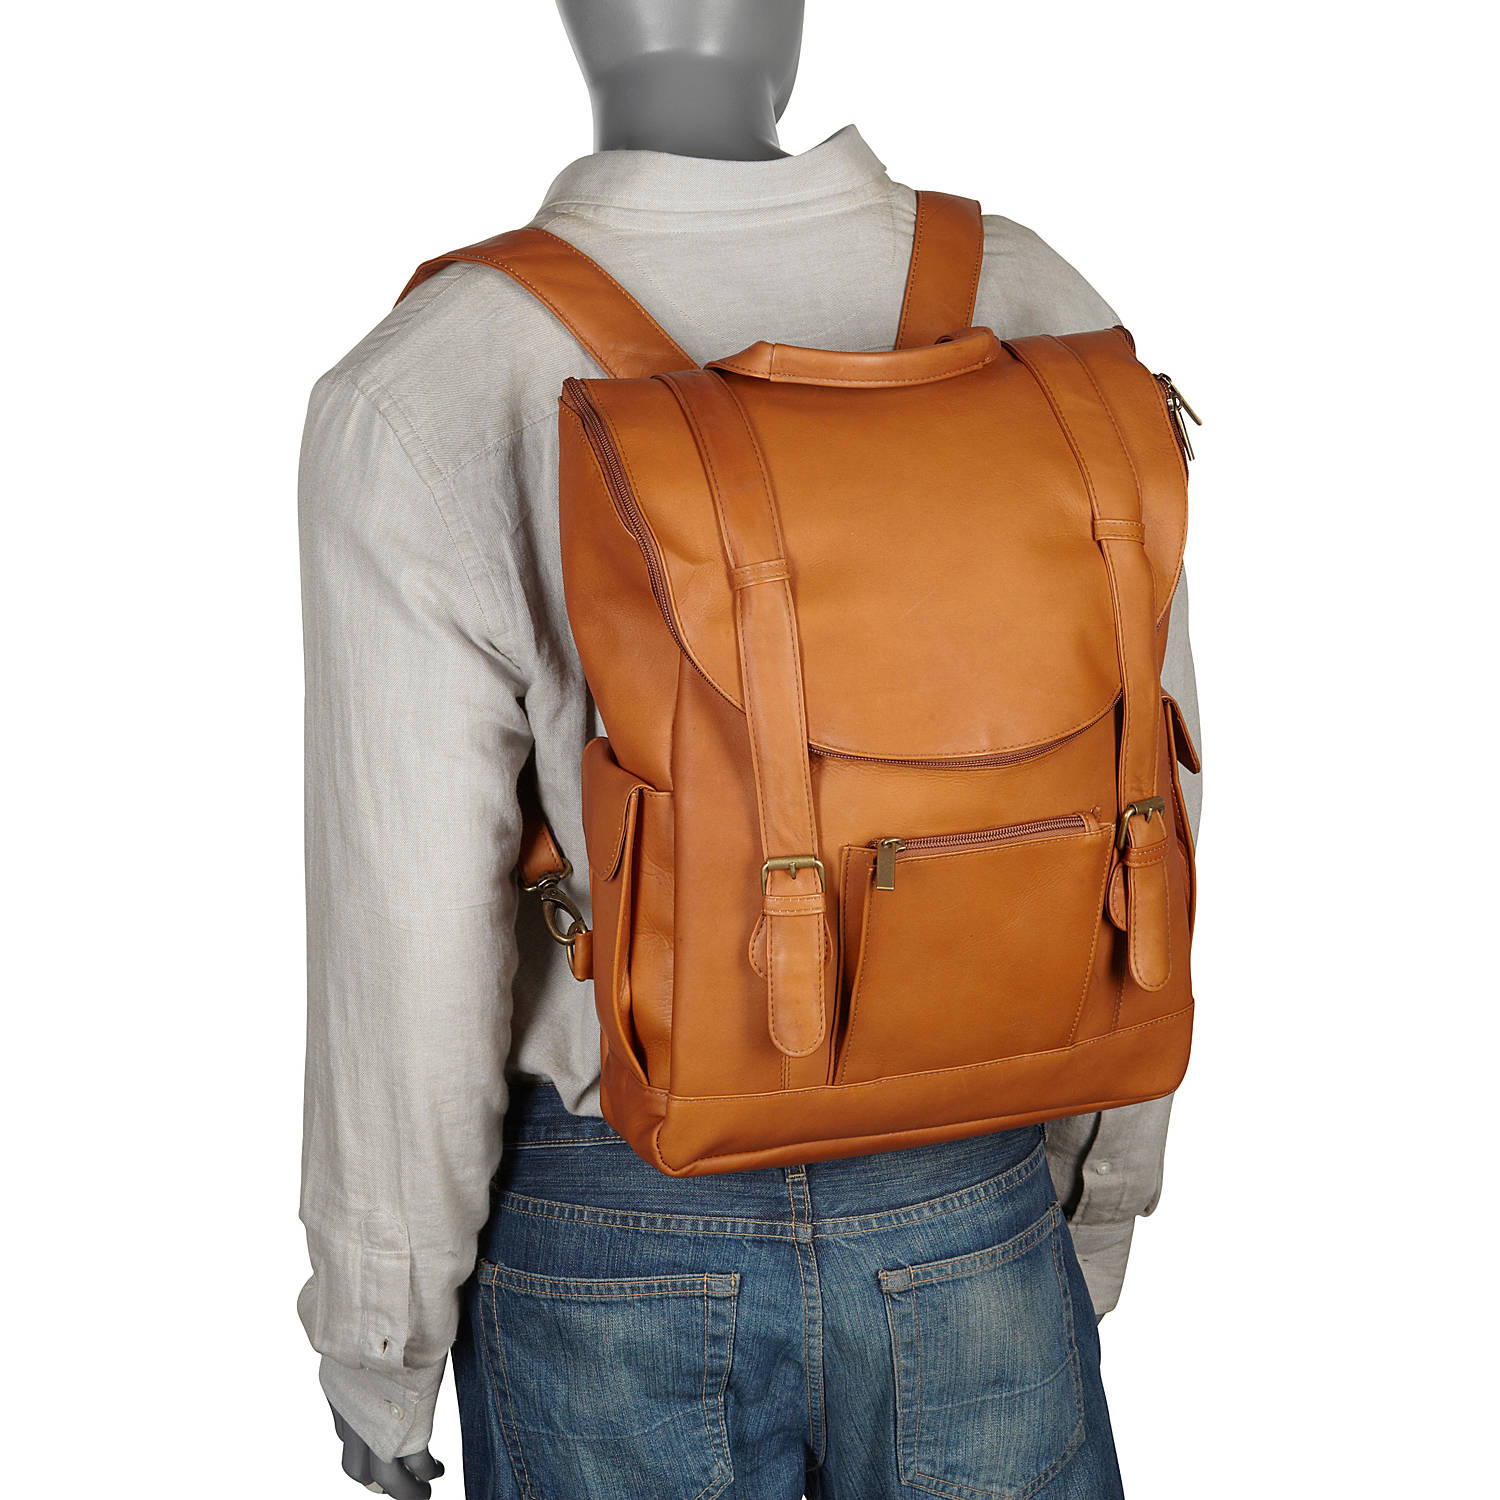 The Elegance | Leather Laptop Backpack for 15 Inch Laptops